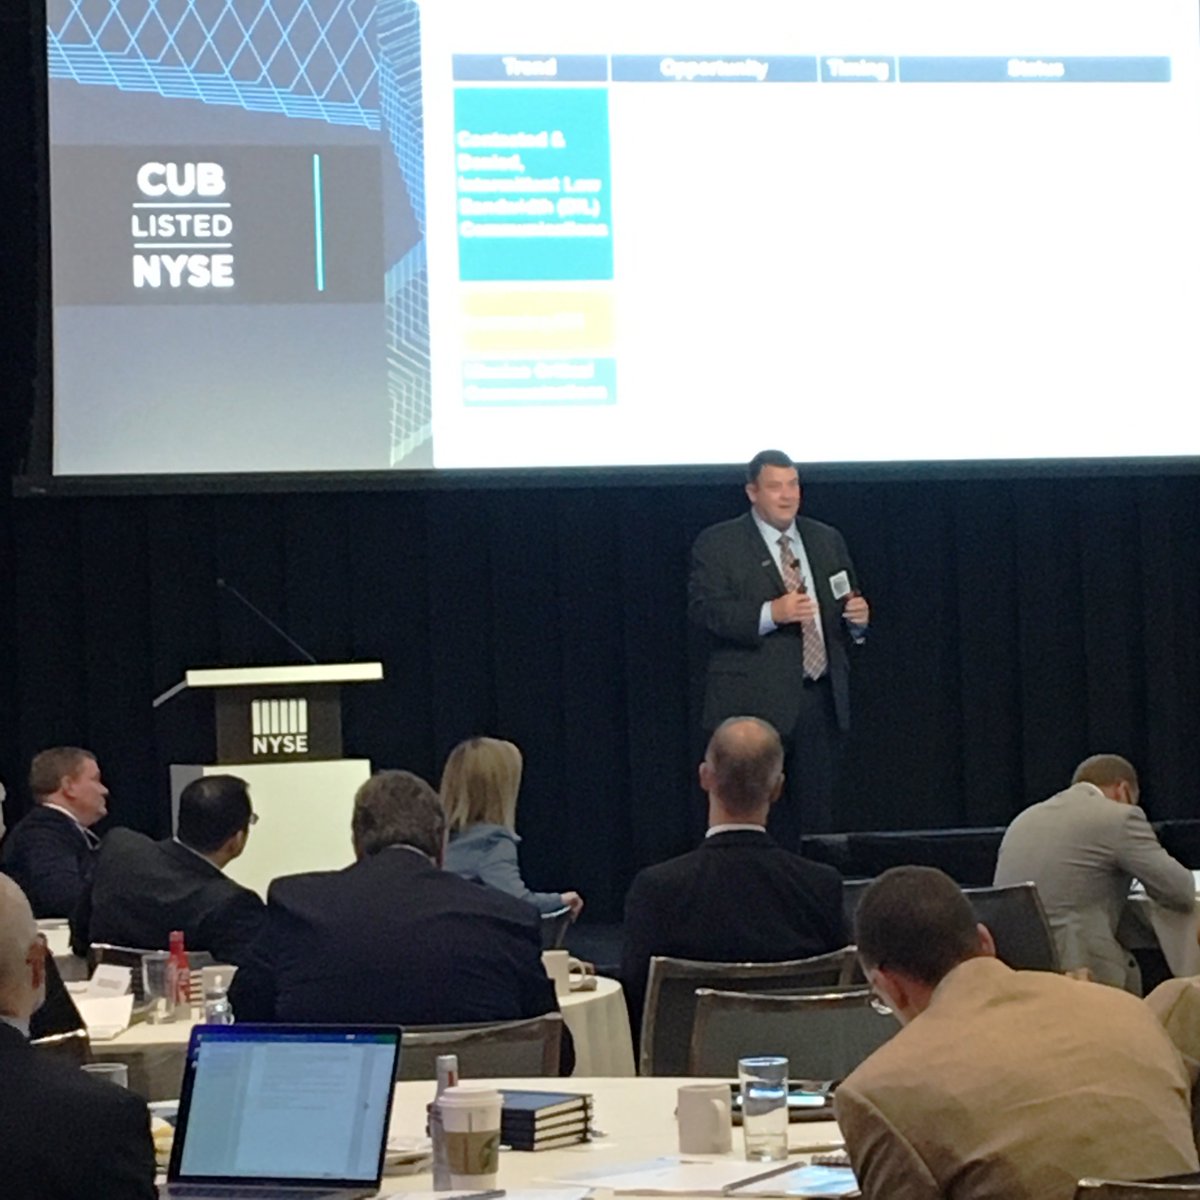 Mike Twyman, President of @Cubic_MS, telling the #NextMission strategy story @NYSE for our Analyst & #InvestorDay. We are all in. #WeAreCubic #C4ISR #GATRInAction #securecommunications #securenetworking #DTECH #VocalityROIP #MotionDSP #Teralogics #CrossDomain #XD